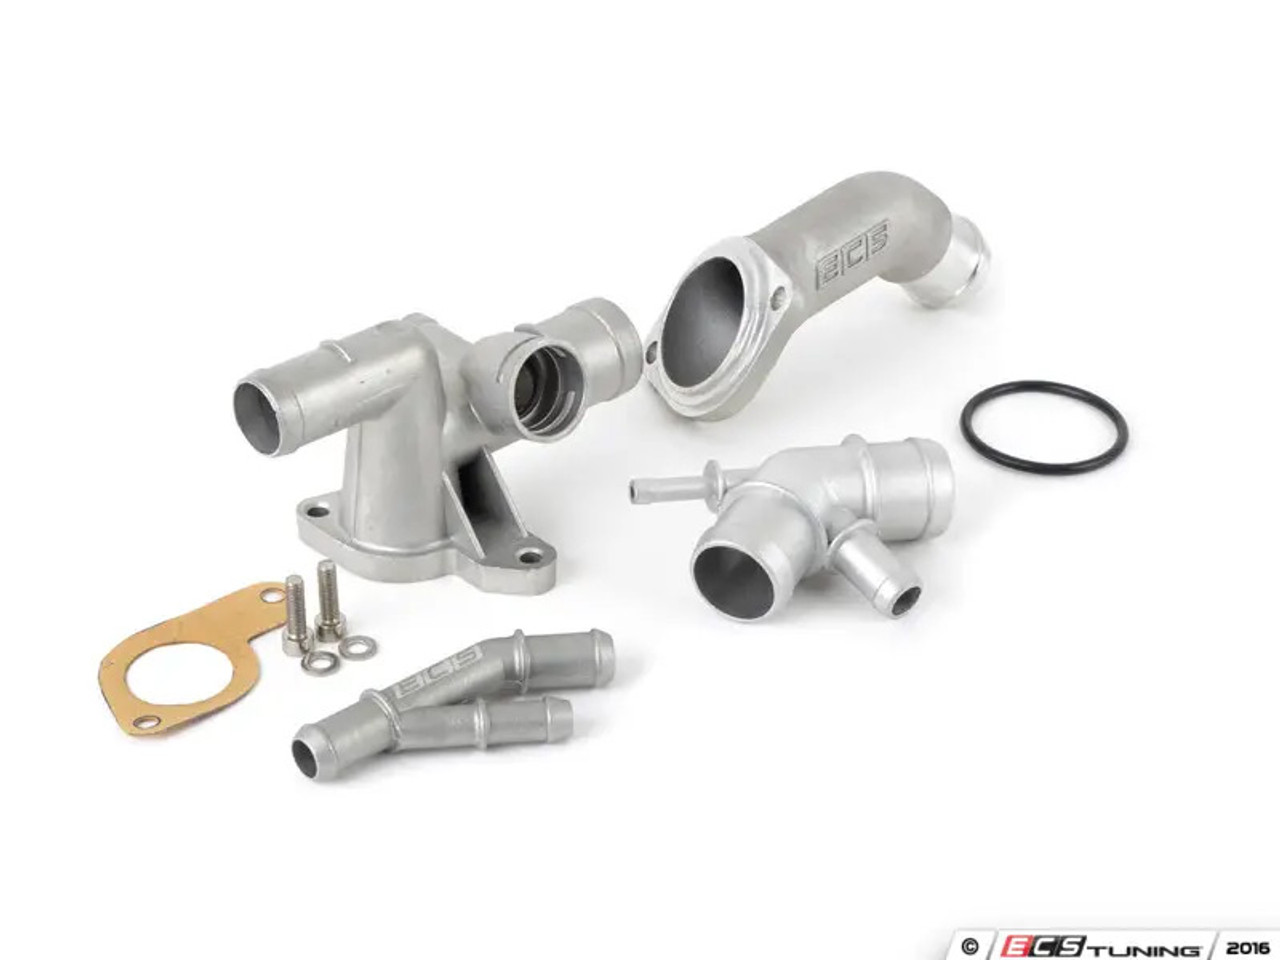 Lupo GTI thermostat housing - Car Care, Maintenance and Mechanical